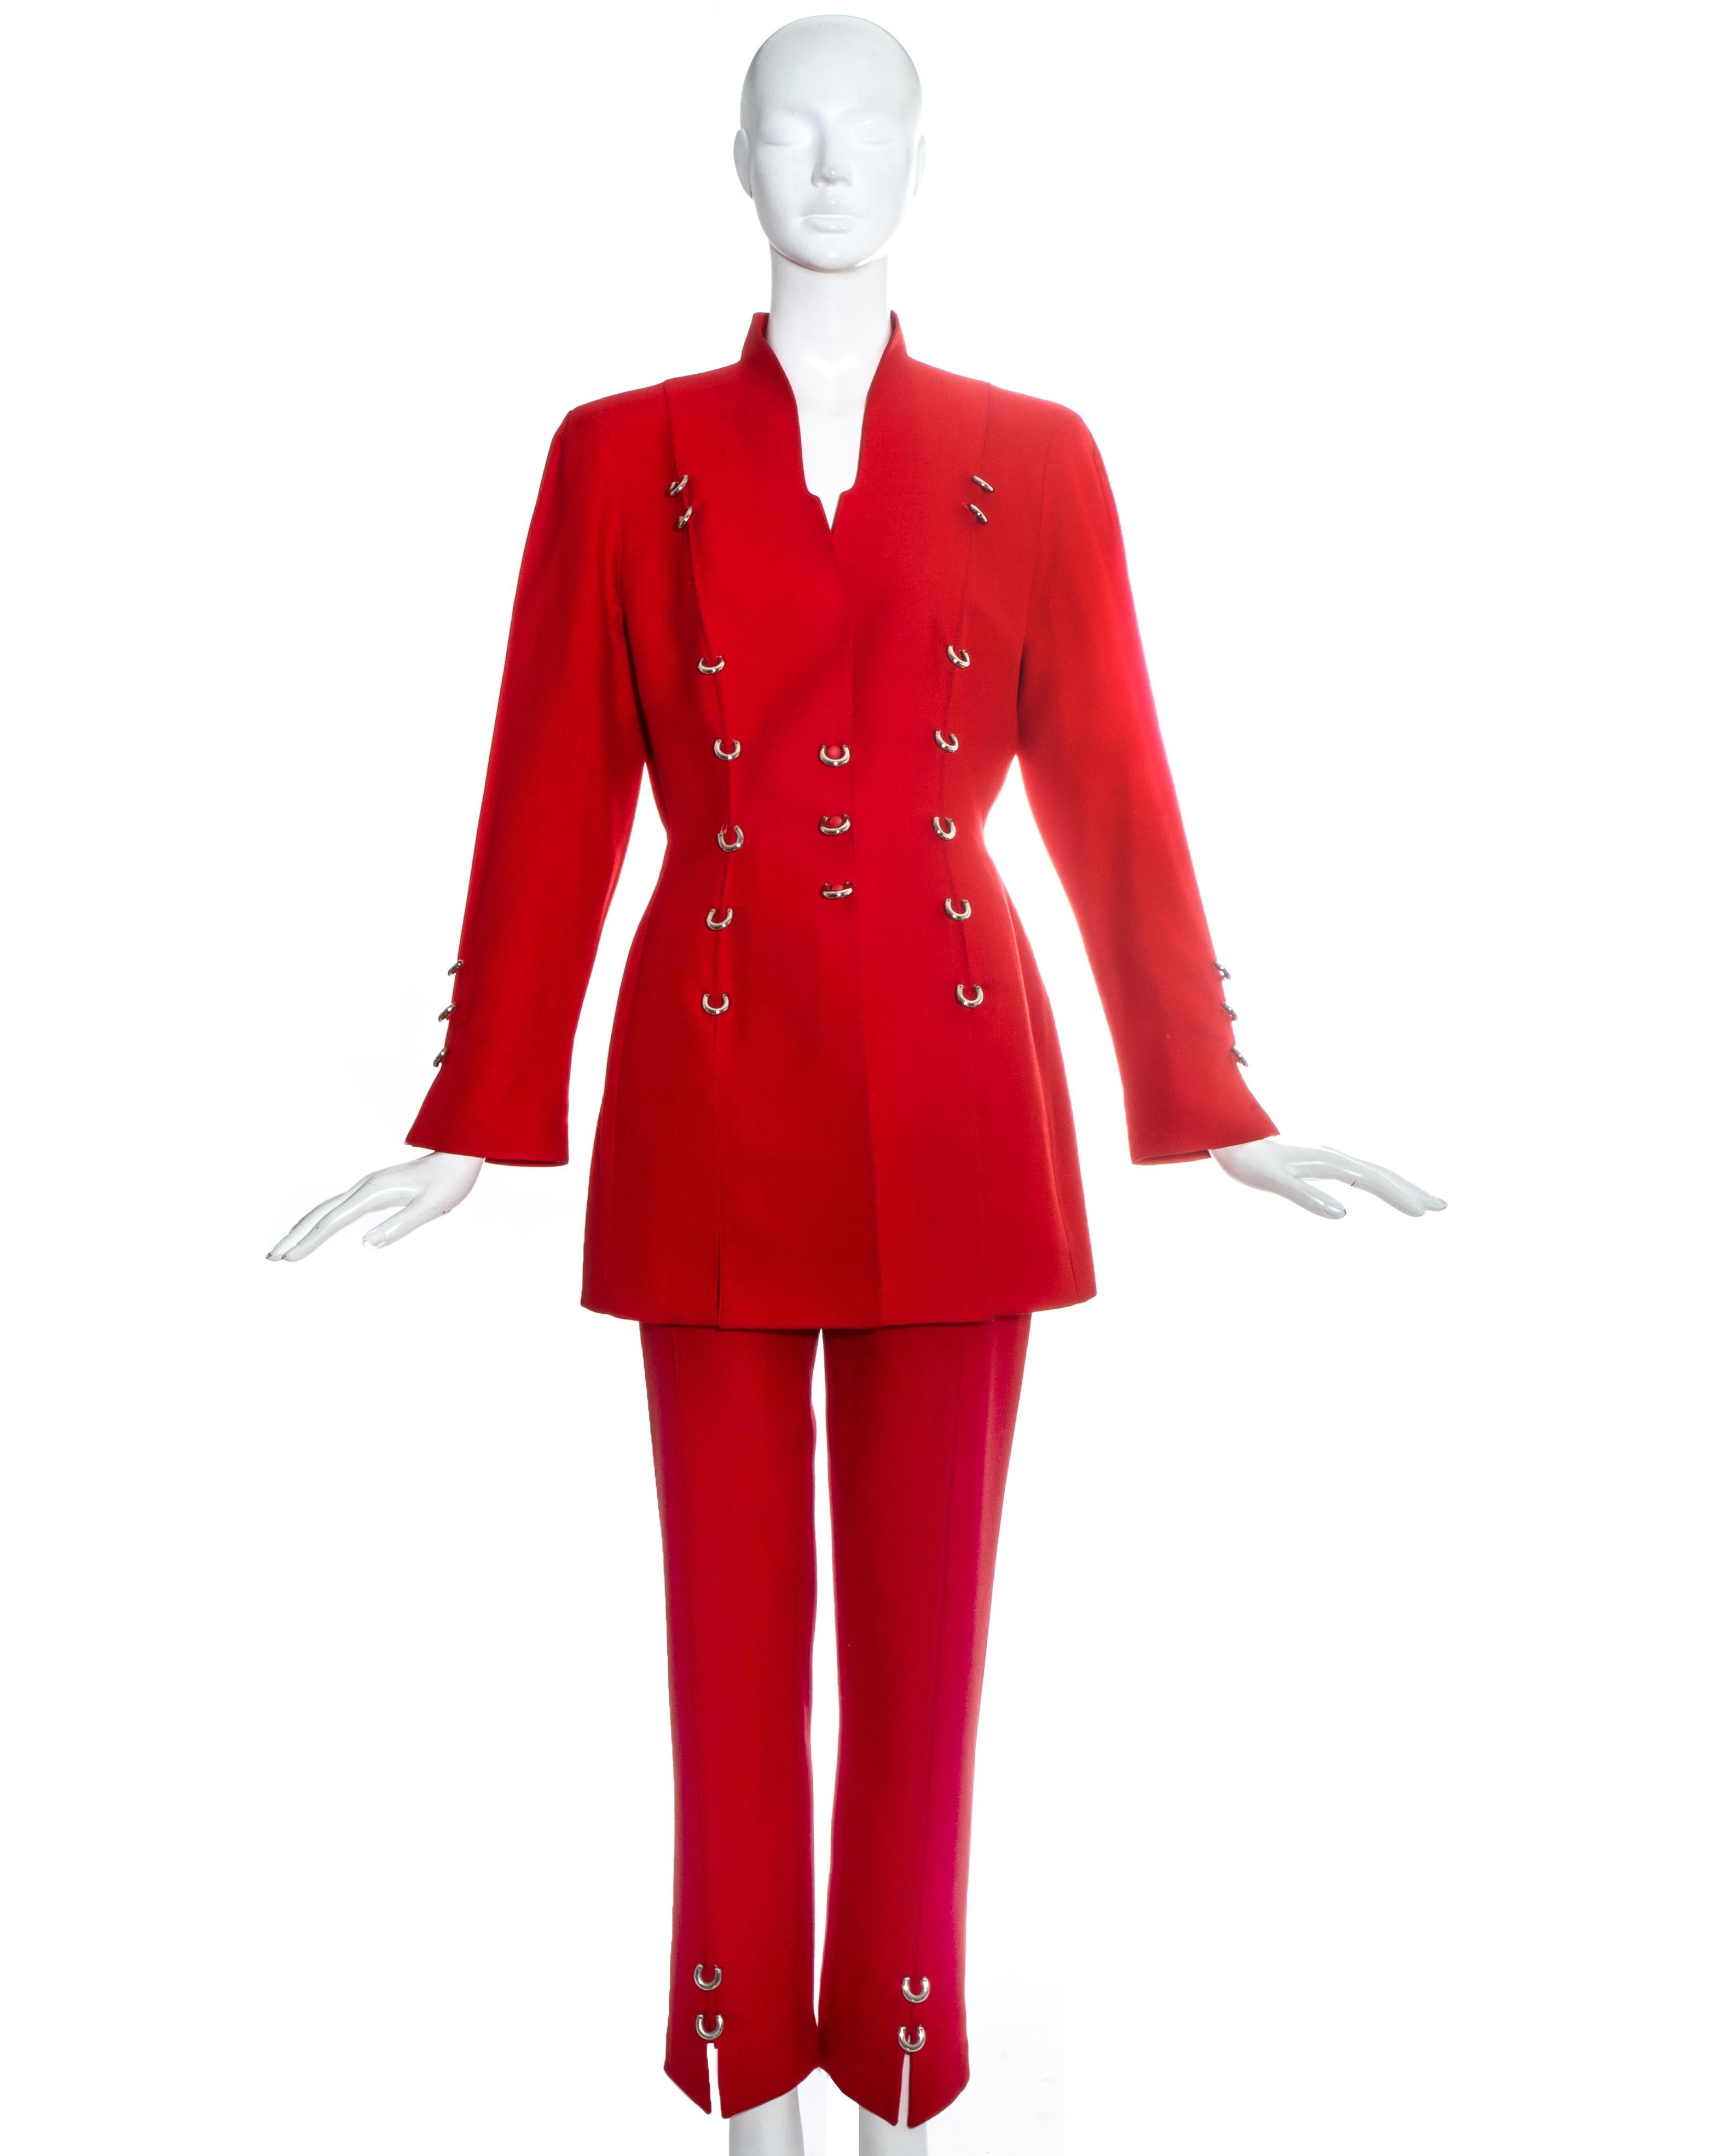 Thierry Mugler red pant suit with decorative silver metal rings.

c. 1990s